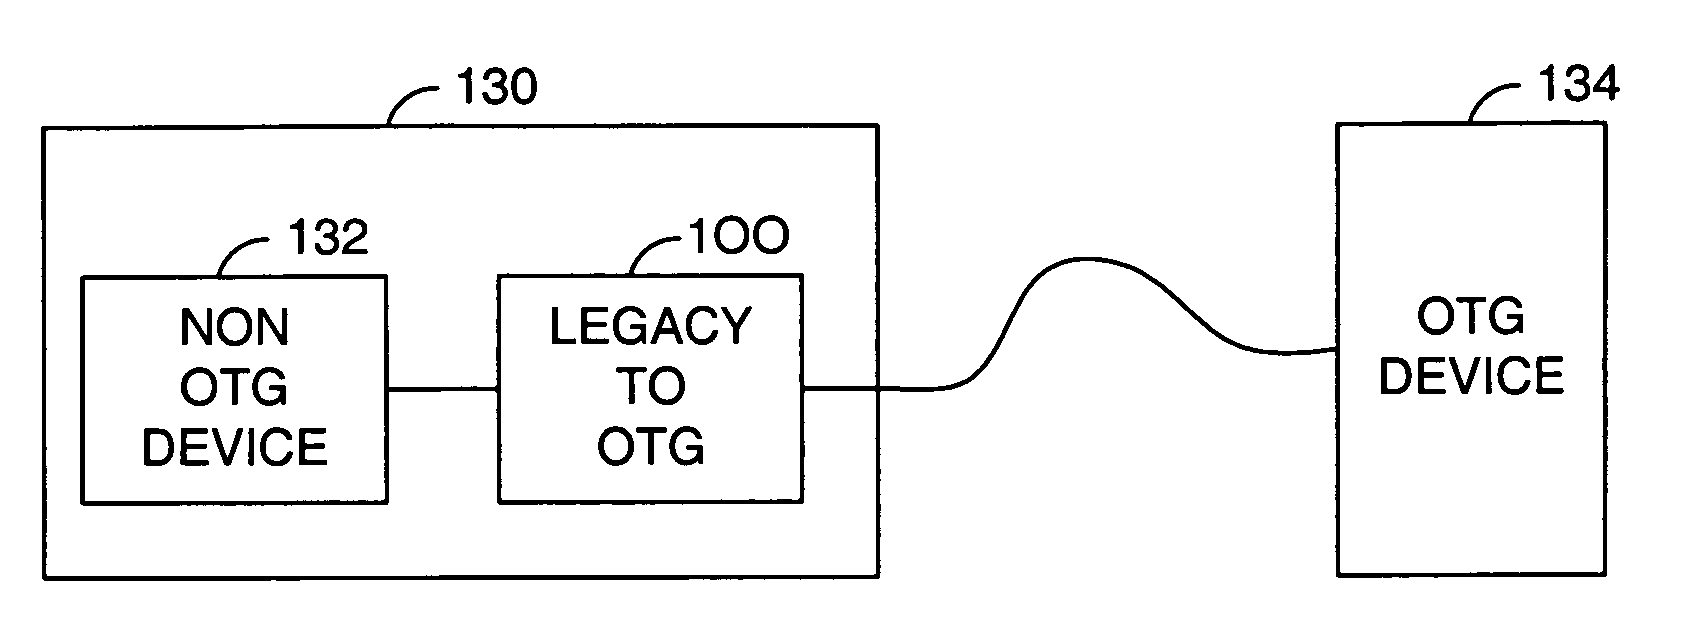 Method and apparatus for adding OTG dual role device capability to a USB peripheral